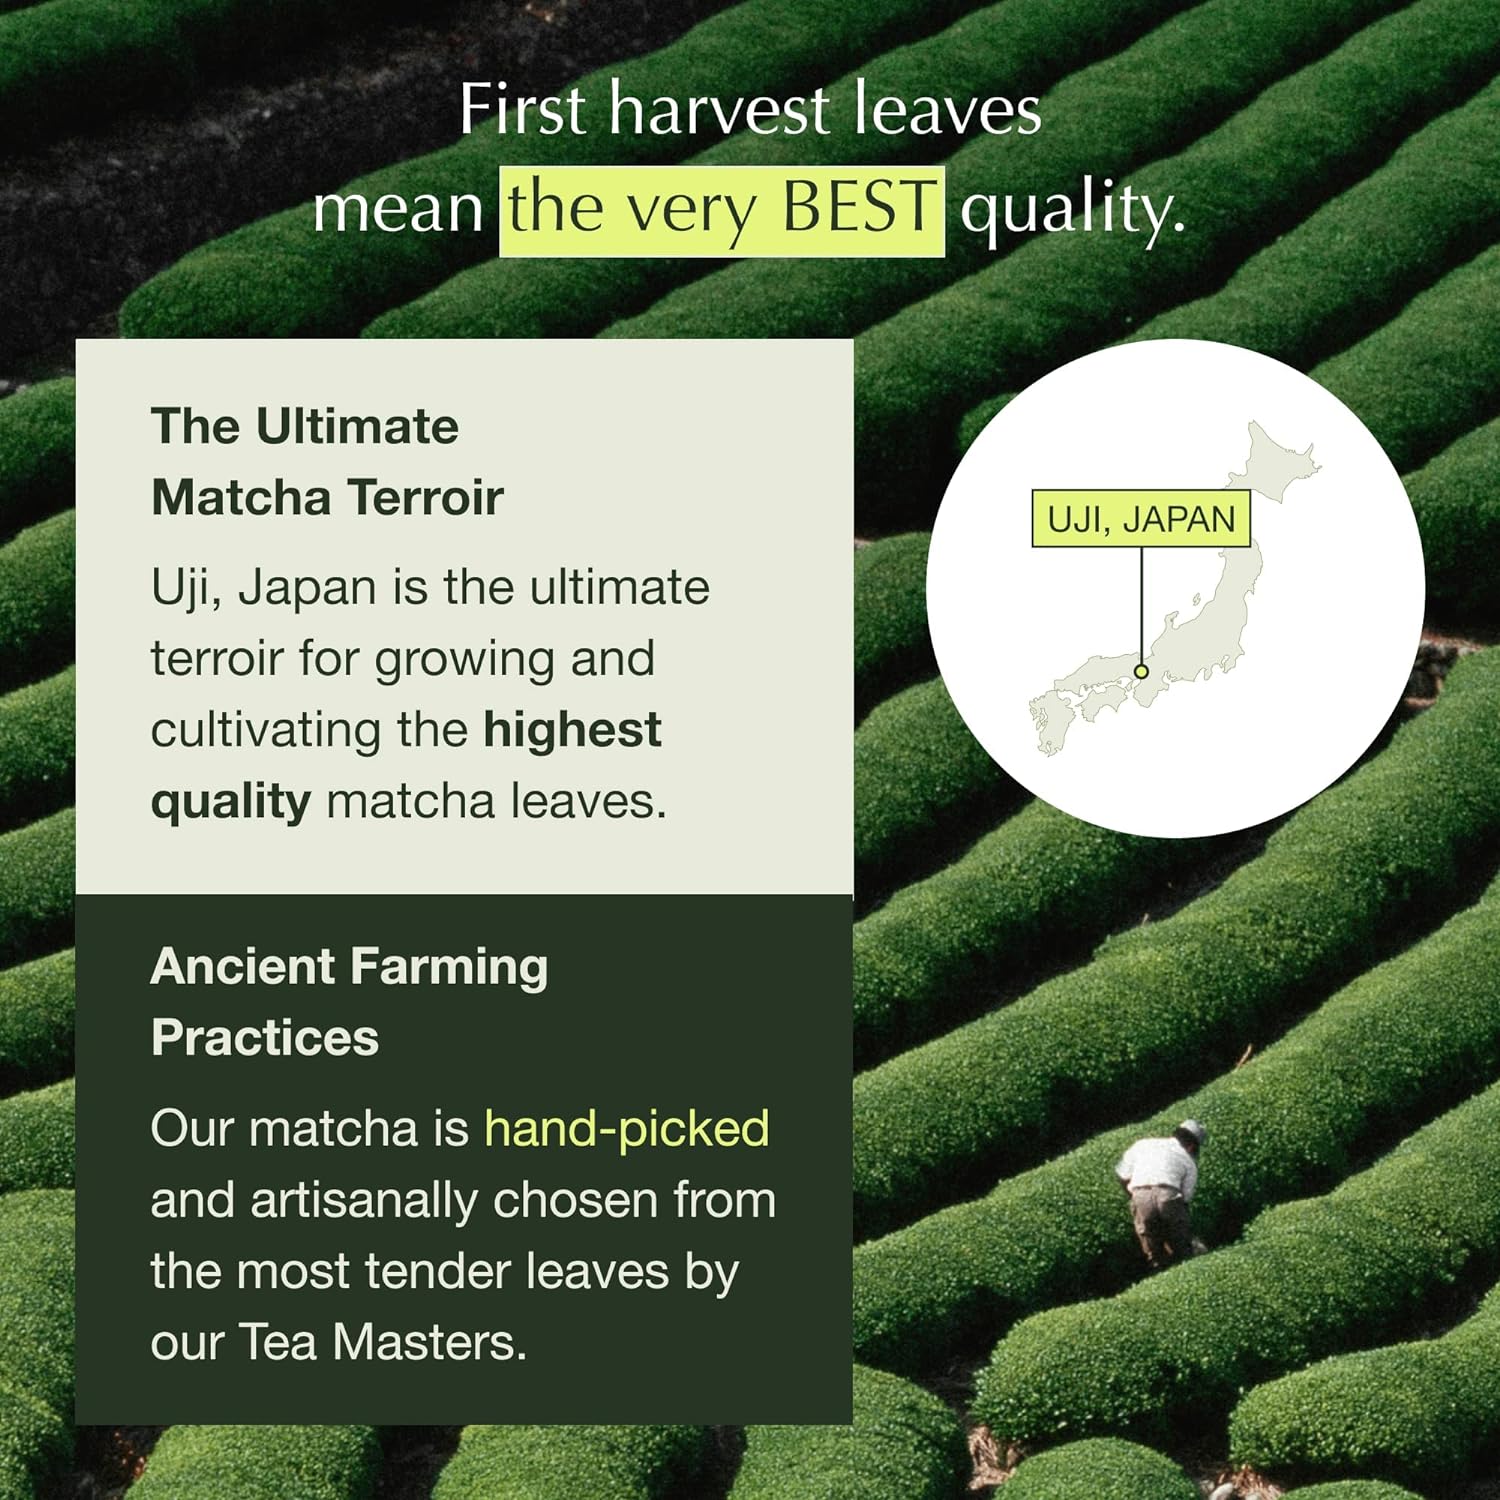 The best matcha tea kit that every matcha lover should own